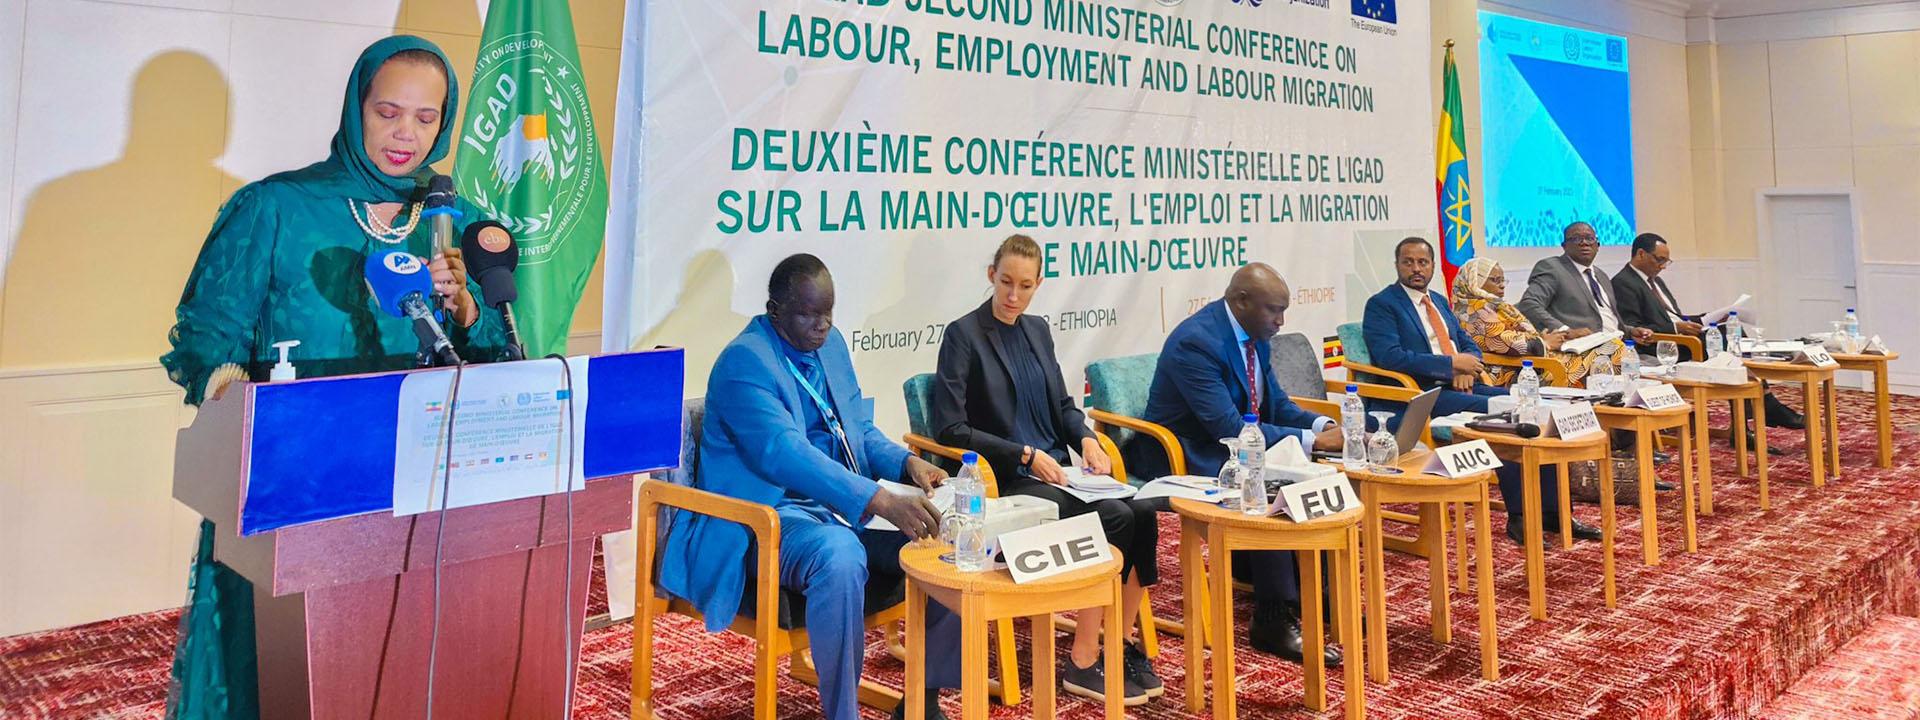 IGAD and ILO Launch Experts Meeting on Labour, Employment and Labour Migration